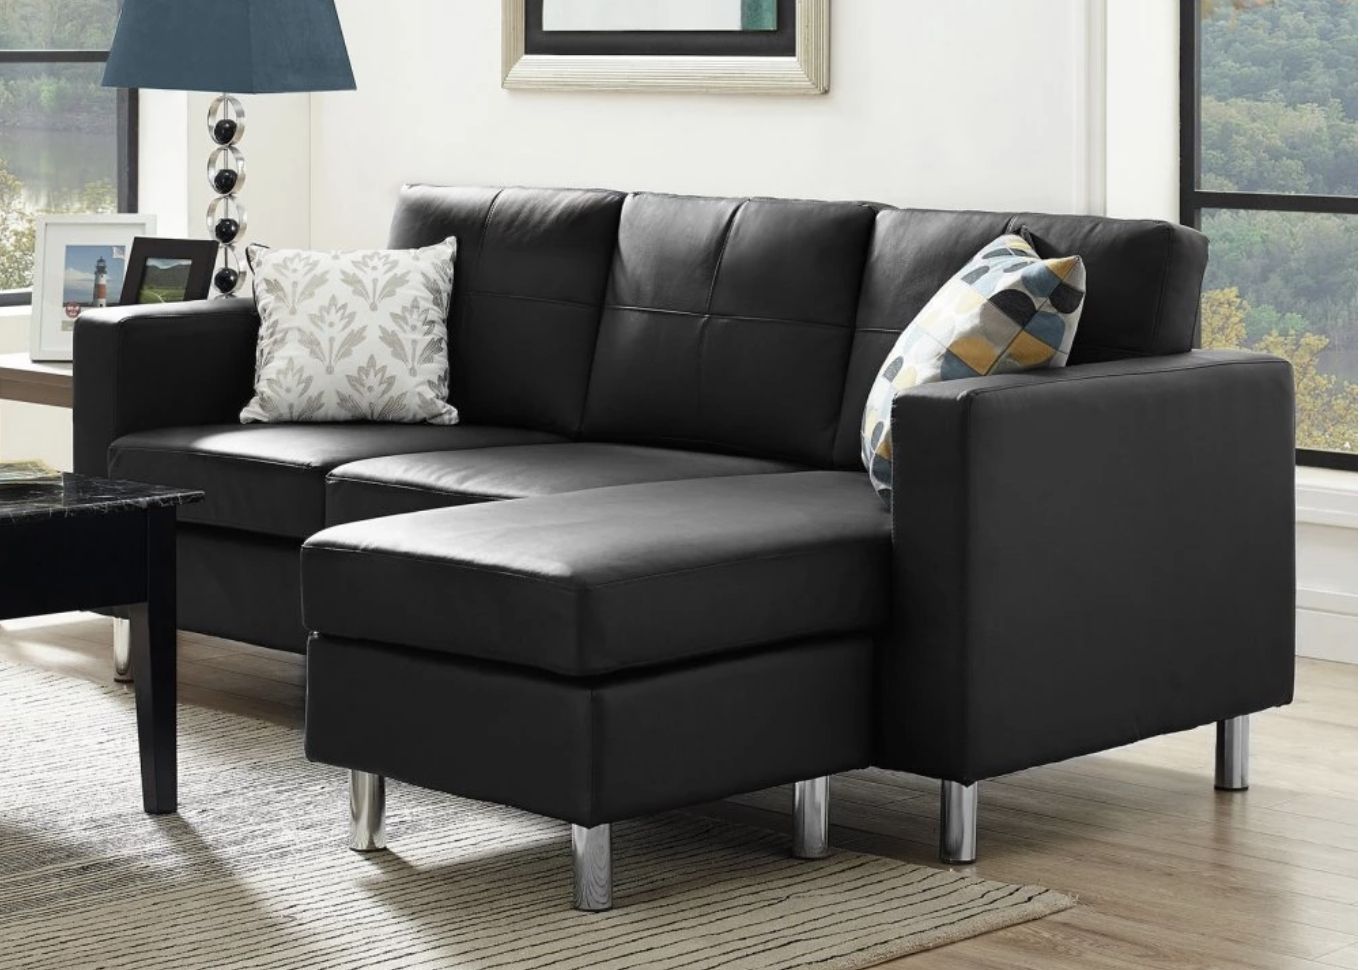 Gallery Of Sectional Sofas In Small Spaces View 7 Of 20 Photos